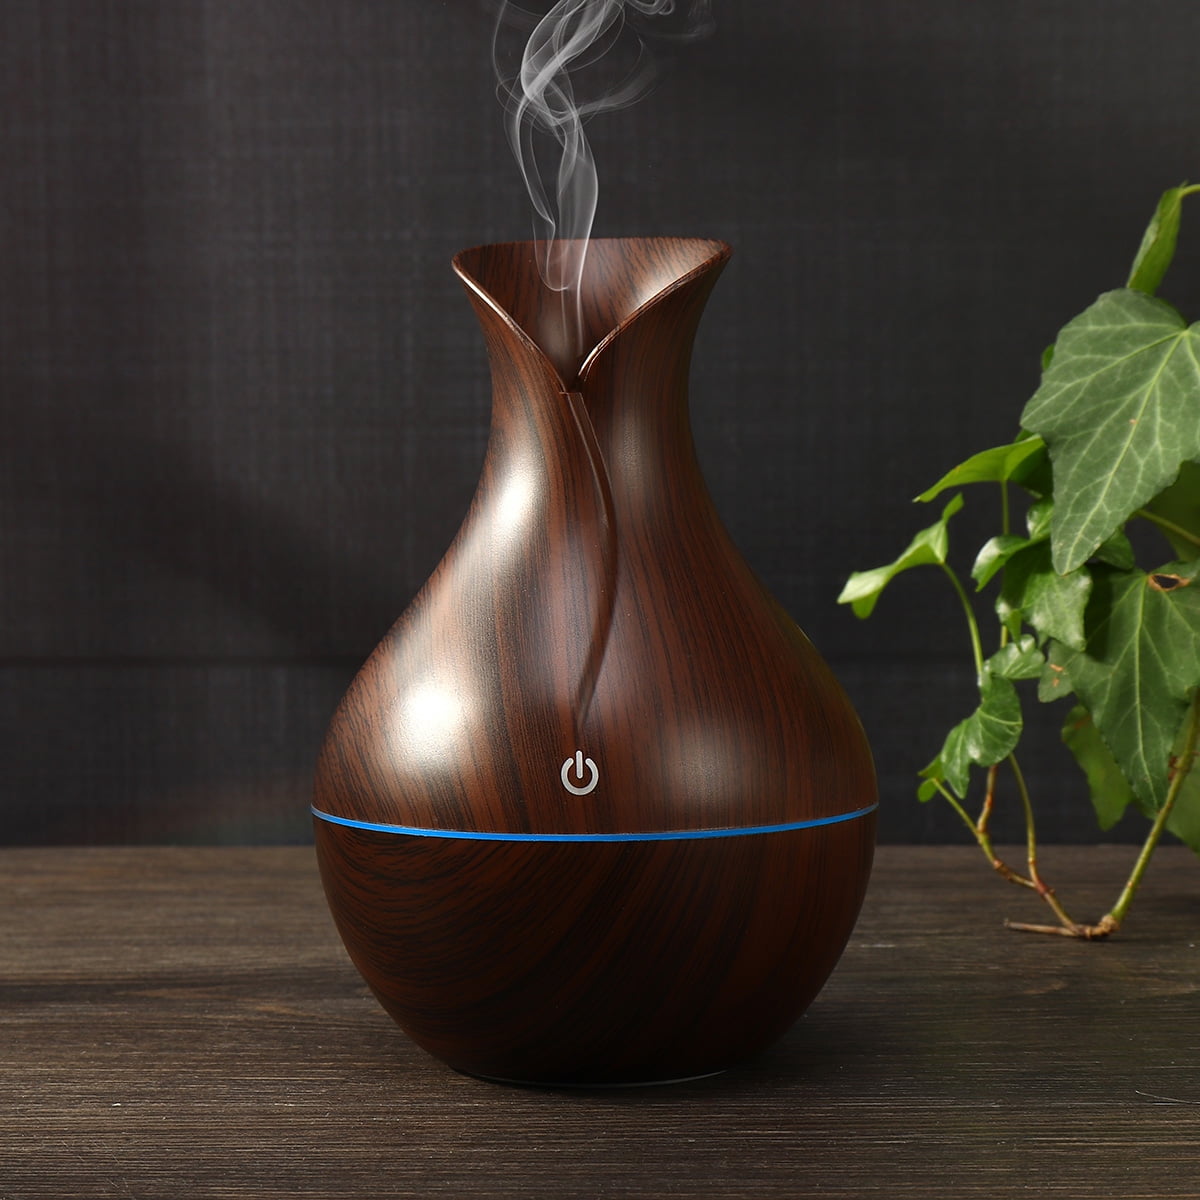 Kmise 300ml Aroma Essential Oil Diffuser Ultrasonic Cool Mist Humidifier Wood 